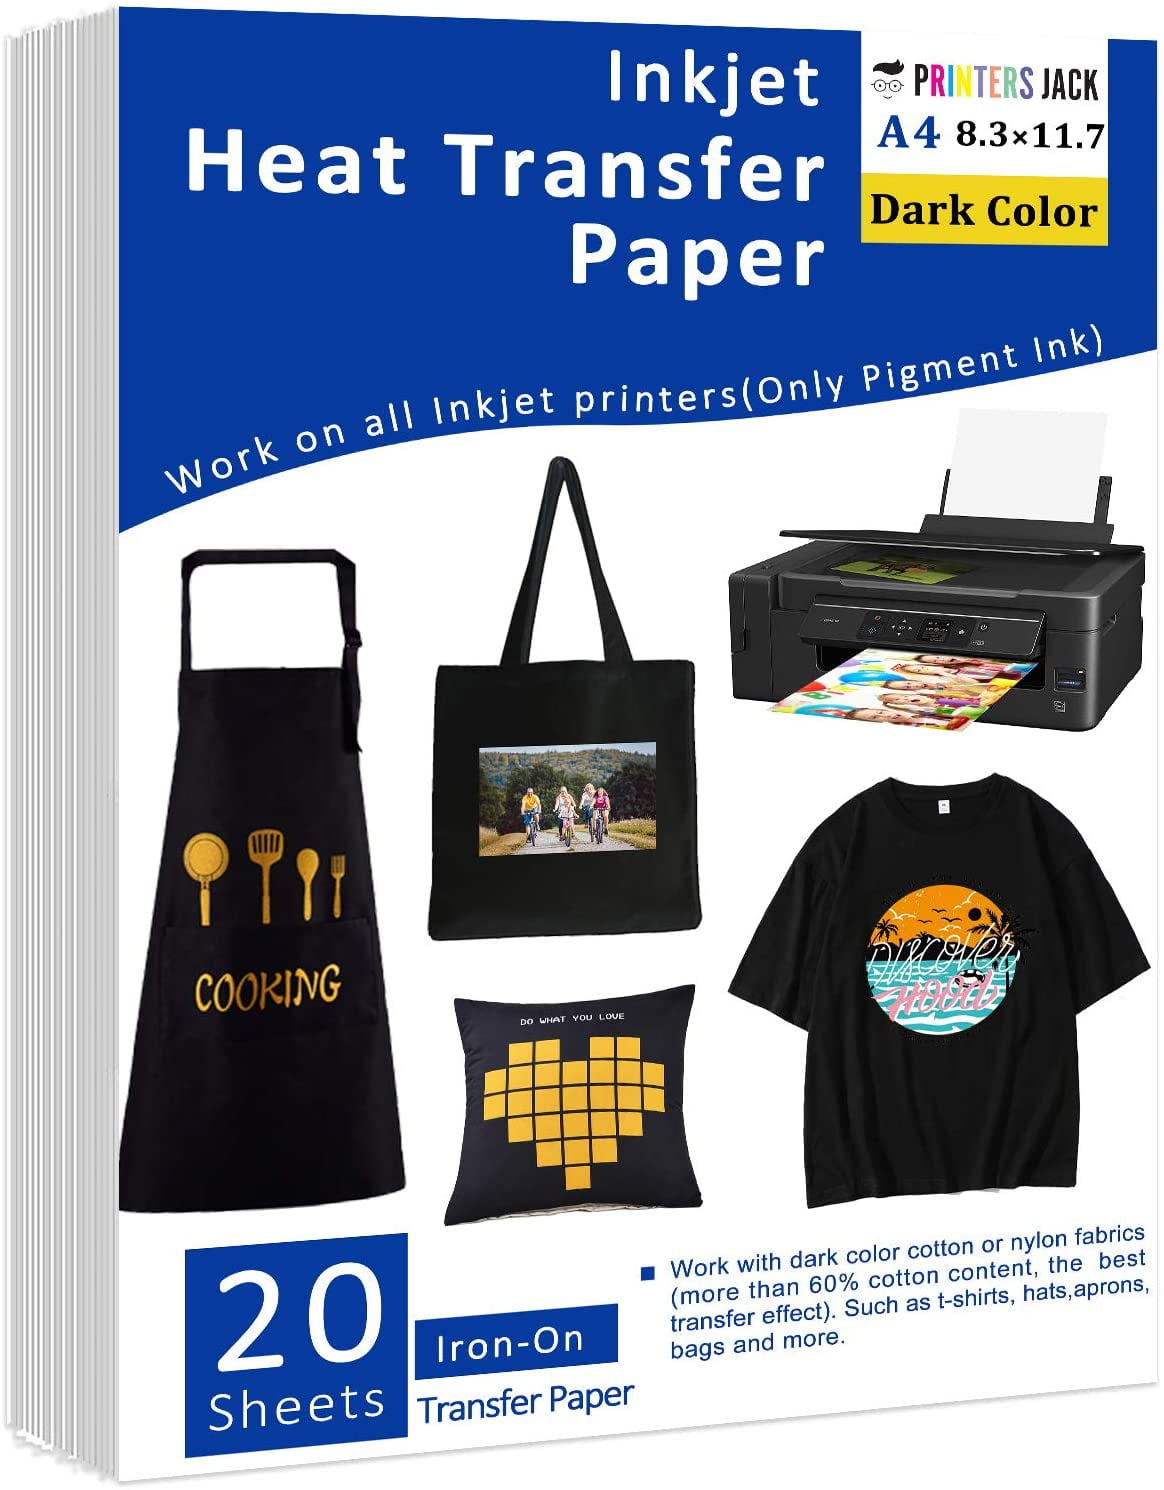 Long Lasting Transfer No Cracking Heat Transfer Paper for Inkjet Printers Iron On Transfer Paper for Dark Fabric T shirts Printable Heat Transfer Vinyl 8.5x11 Pack of 20 Sheets Wash Durable 